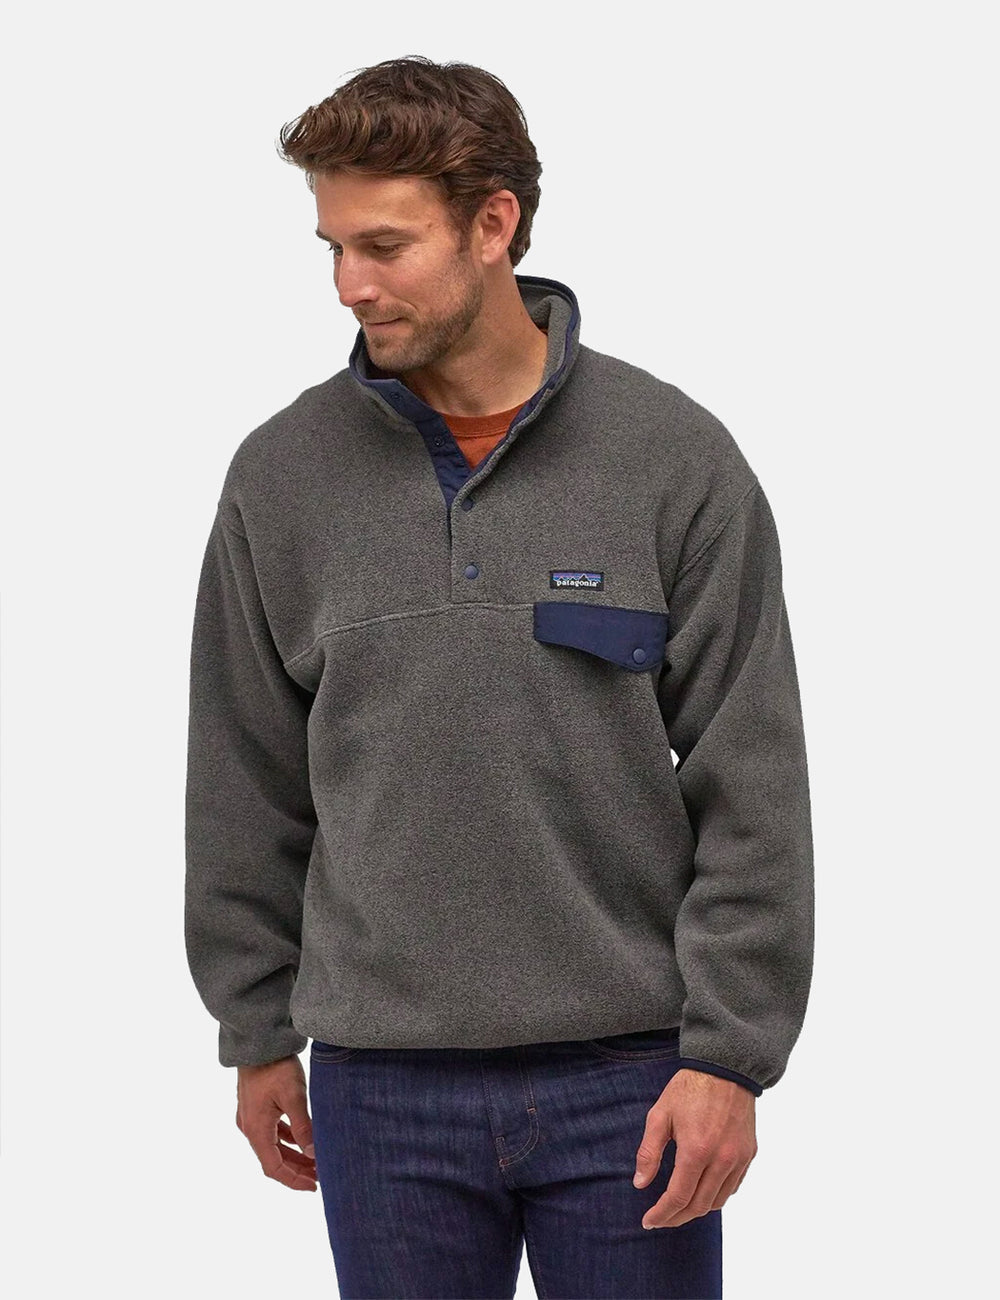 Patagonia Synchilla Snap-T Pullover - Nickel/New Navy I URBAN EXCESS.